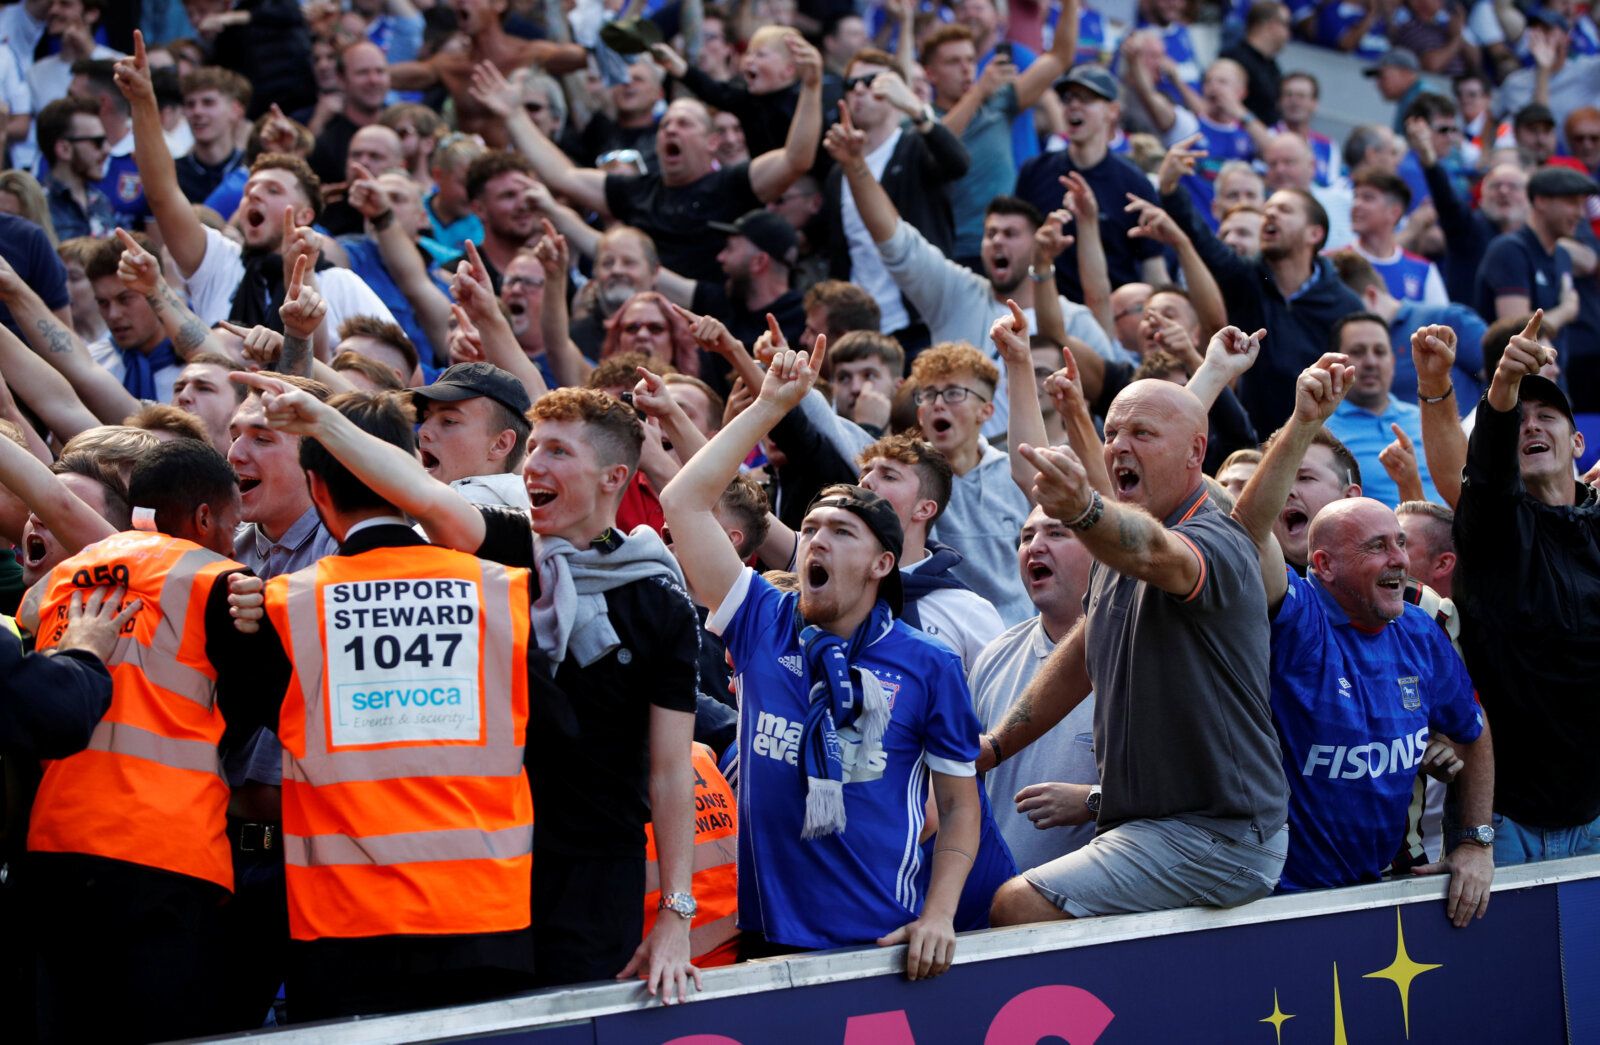 Soccer Football - Championship - Ipswich Town v Norwich City - Portman Road, Ipswich, Britain - September 2, 2018  Ipswich Town fans celebrate their first goal  Action Images/John Sibley  EDITORIAL USE ONLY. No use with unauthorized audio, video, data, fixture lists, club/league logos or 